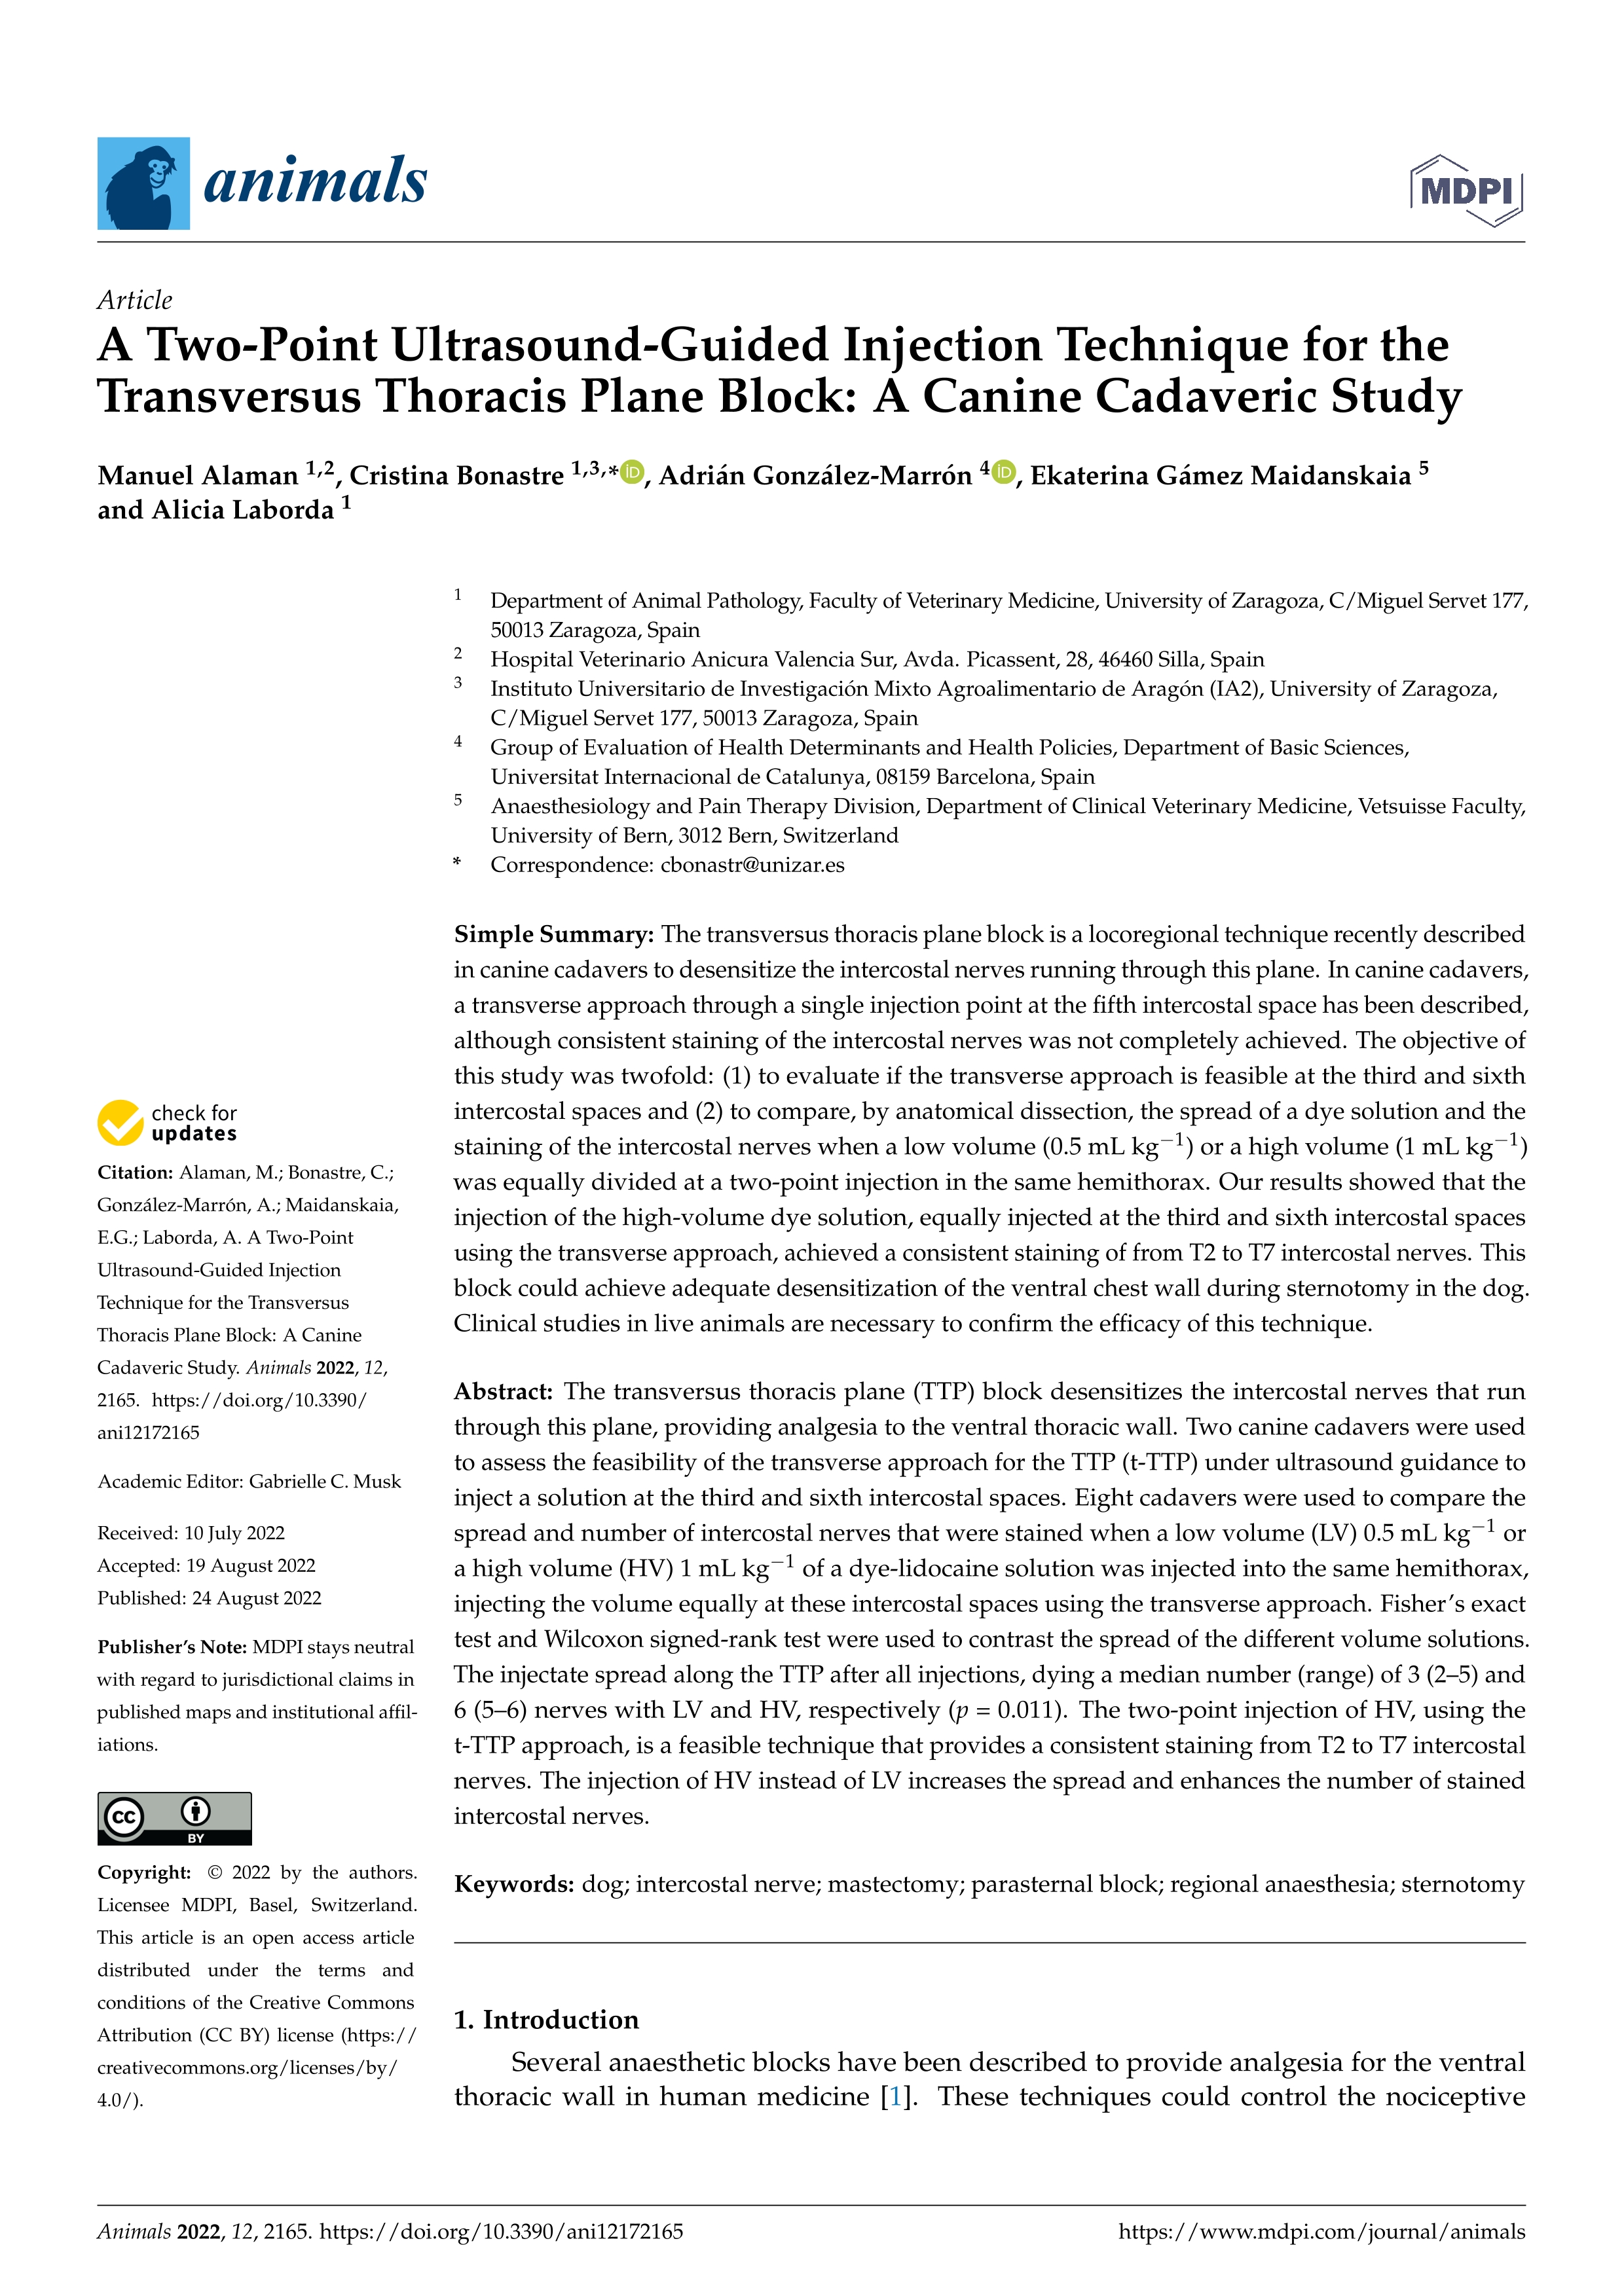 A two-point ultrasound-guided injection technique for the transversus thoracis plane block: a canine cadaveric study